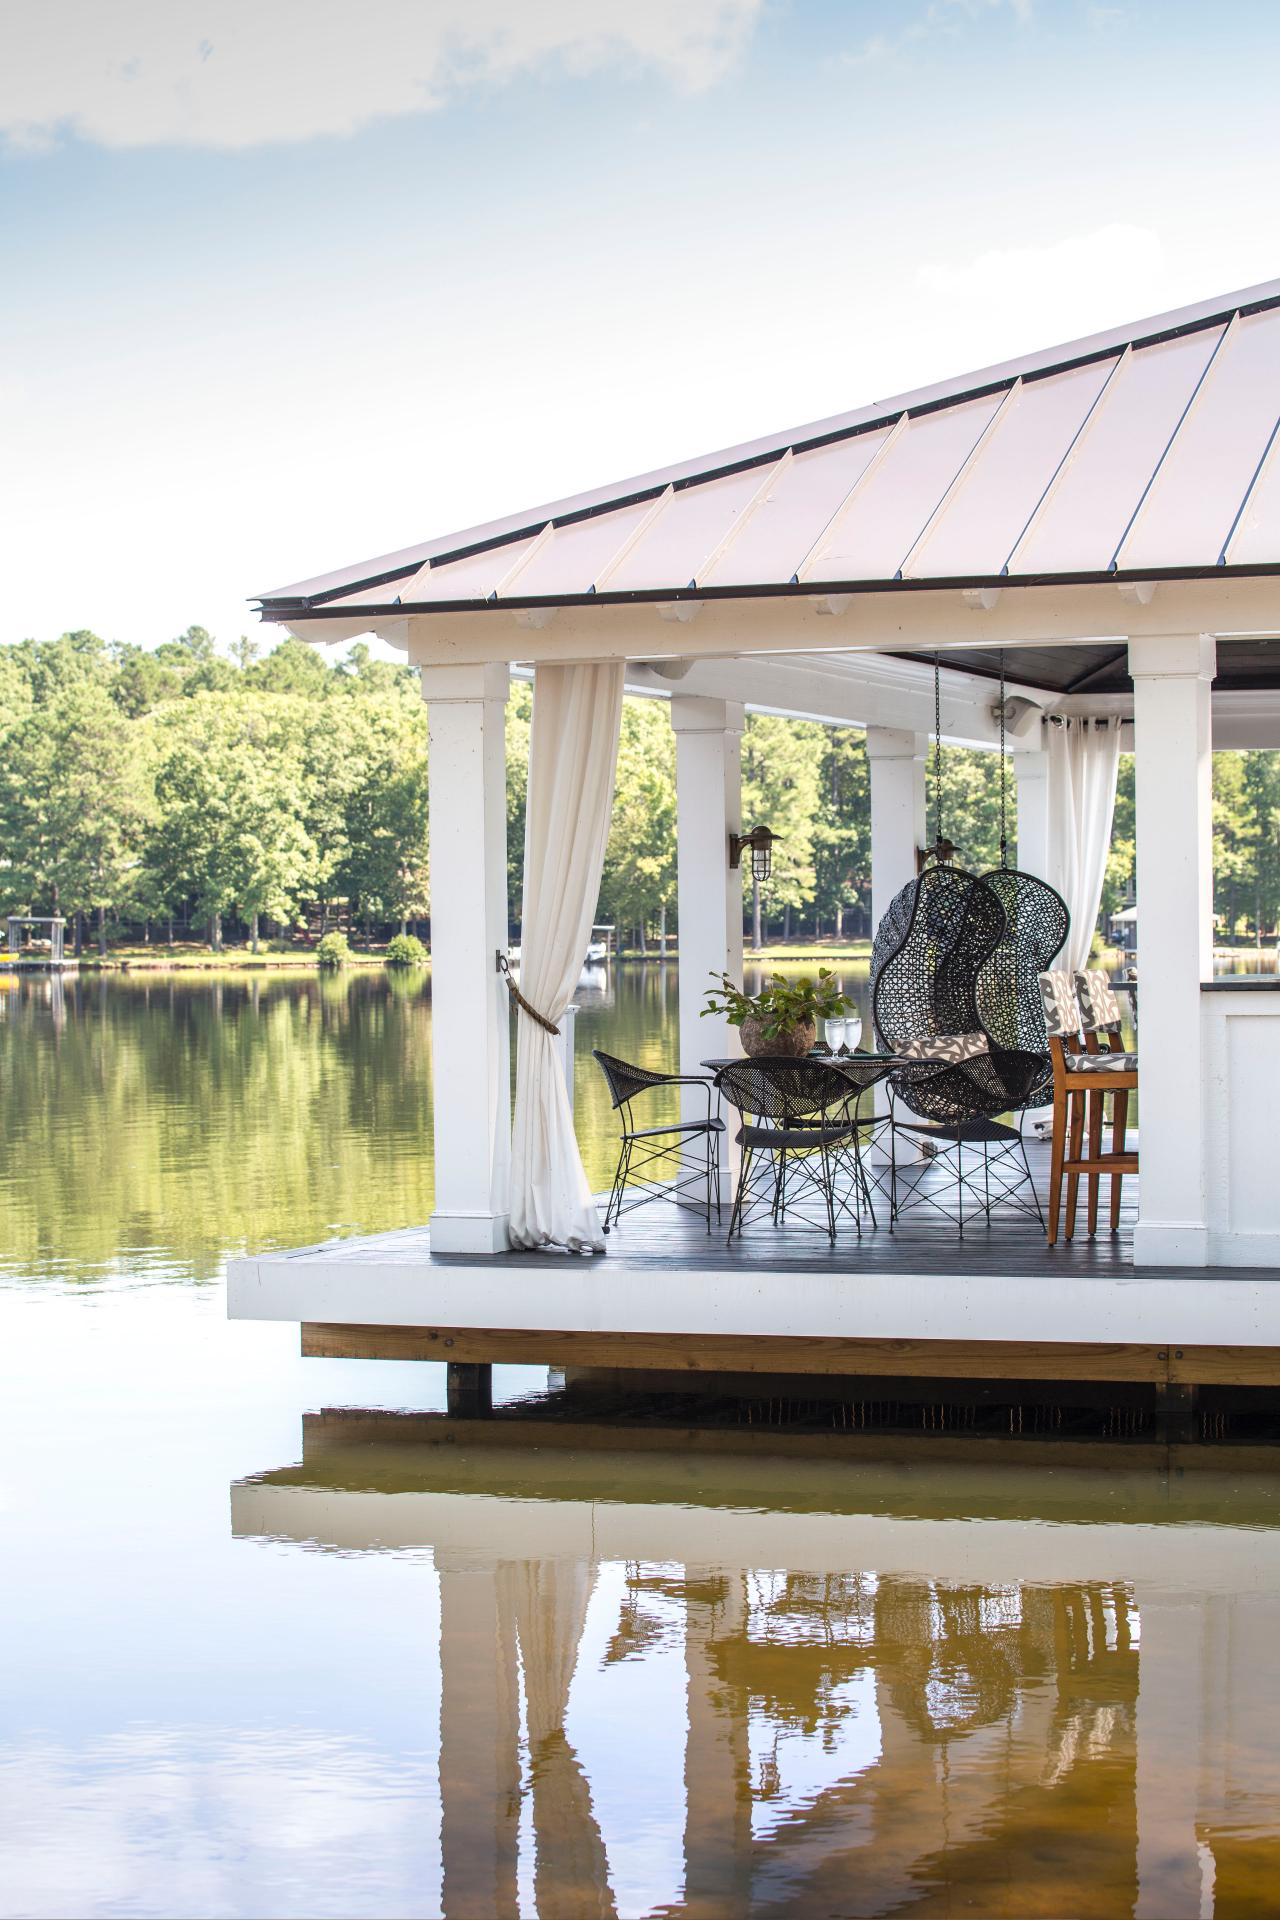 View of Swings &amp; Dining Area on Elevated, Lakeside Deck | HGTV